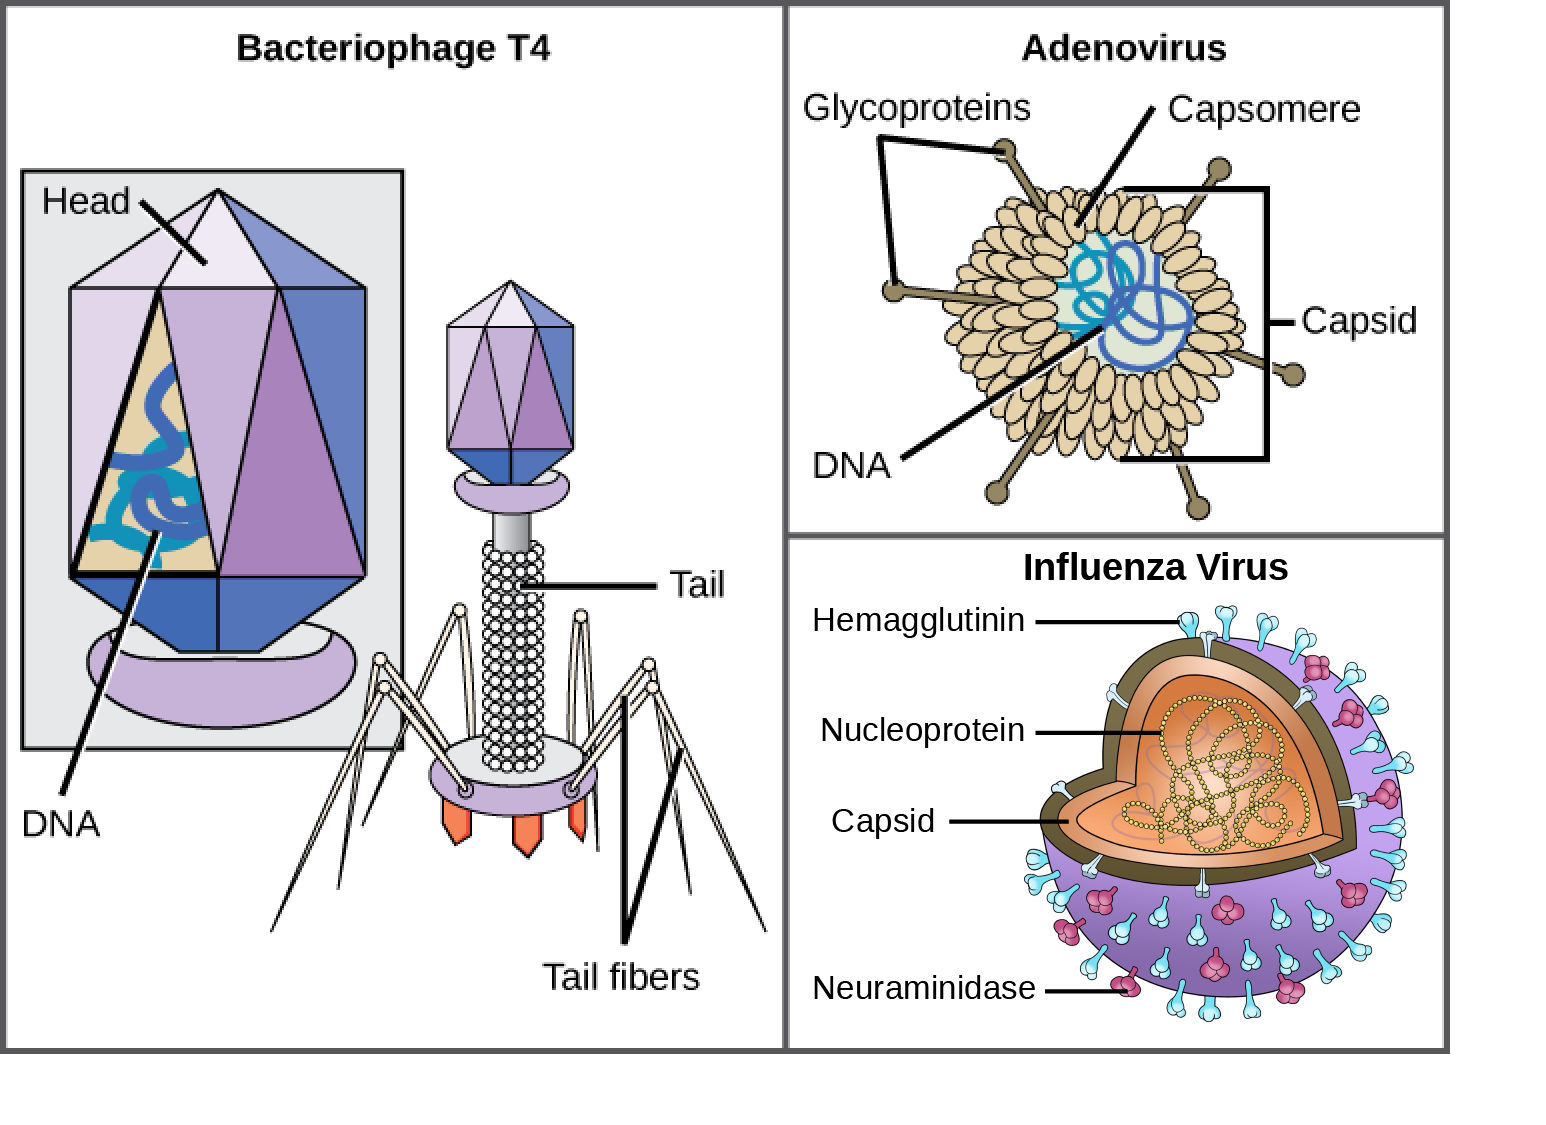 Illustration a shows bacteriophage T4, which houses its DNA genome in a hexagonal head. A long, straight tail extends from the bottom of the head. Tail fibers attached to the base of the tail are bent, like spider legs. In b, adenovirus houses its DNA genome in a round capsid made from many small capsomere subunits. Glycoproteins extend from the capsomere, like pins from a pincushion. In c, the HIV retrovirus houses its RNA genome and a bullet-shaped capsid. A spherical viral envelope, lined with matrix proteins, surrounds the capsid. Two different varieties of glycoprotein spike are embedded in the envelope. Approximately 80 percent of the spikes are hemagglutinin. The remaining 20 percent or so of the glycoprotein spikes consist of neuraminidase.